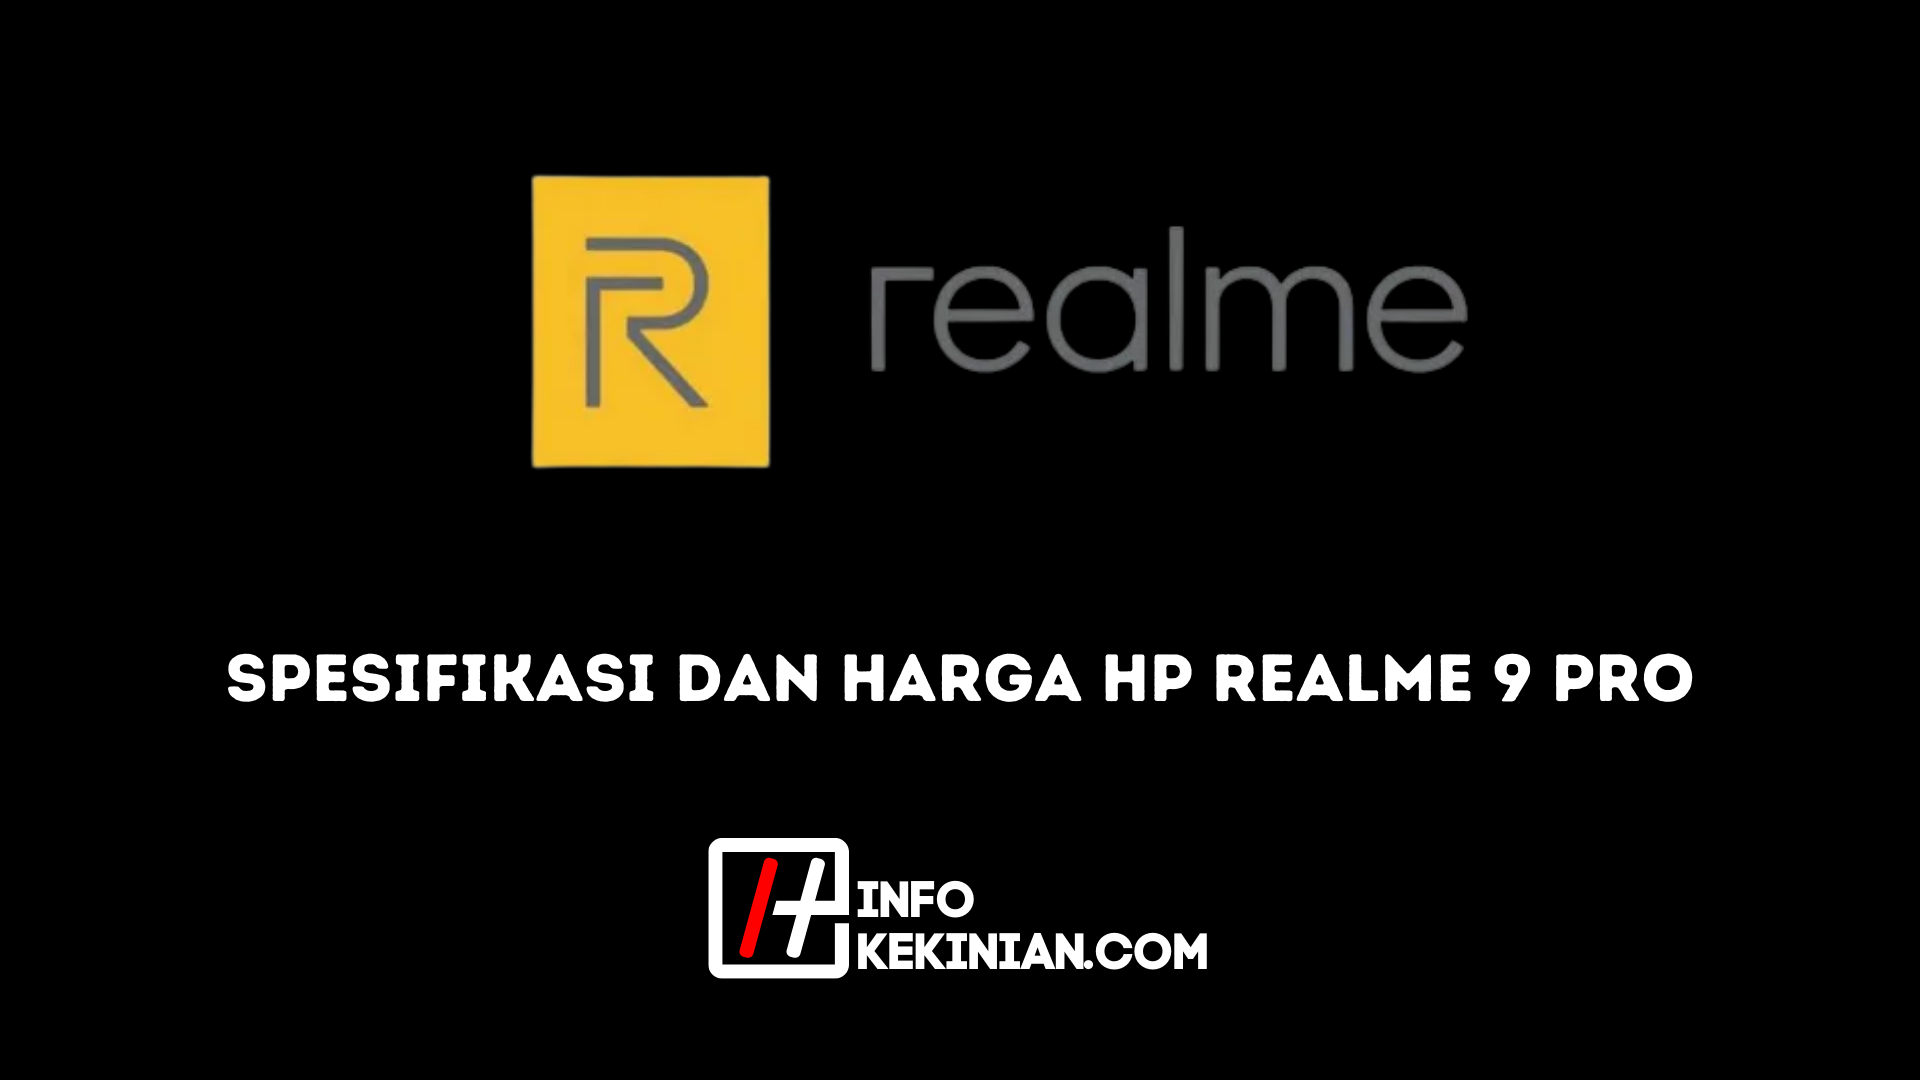 Specifications and Price for the Realme 9 Pro